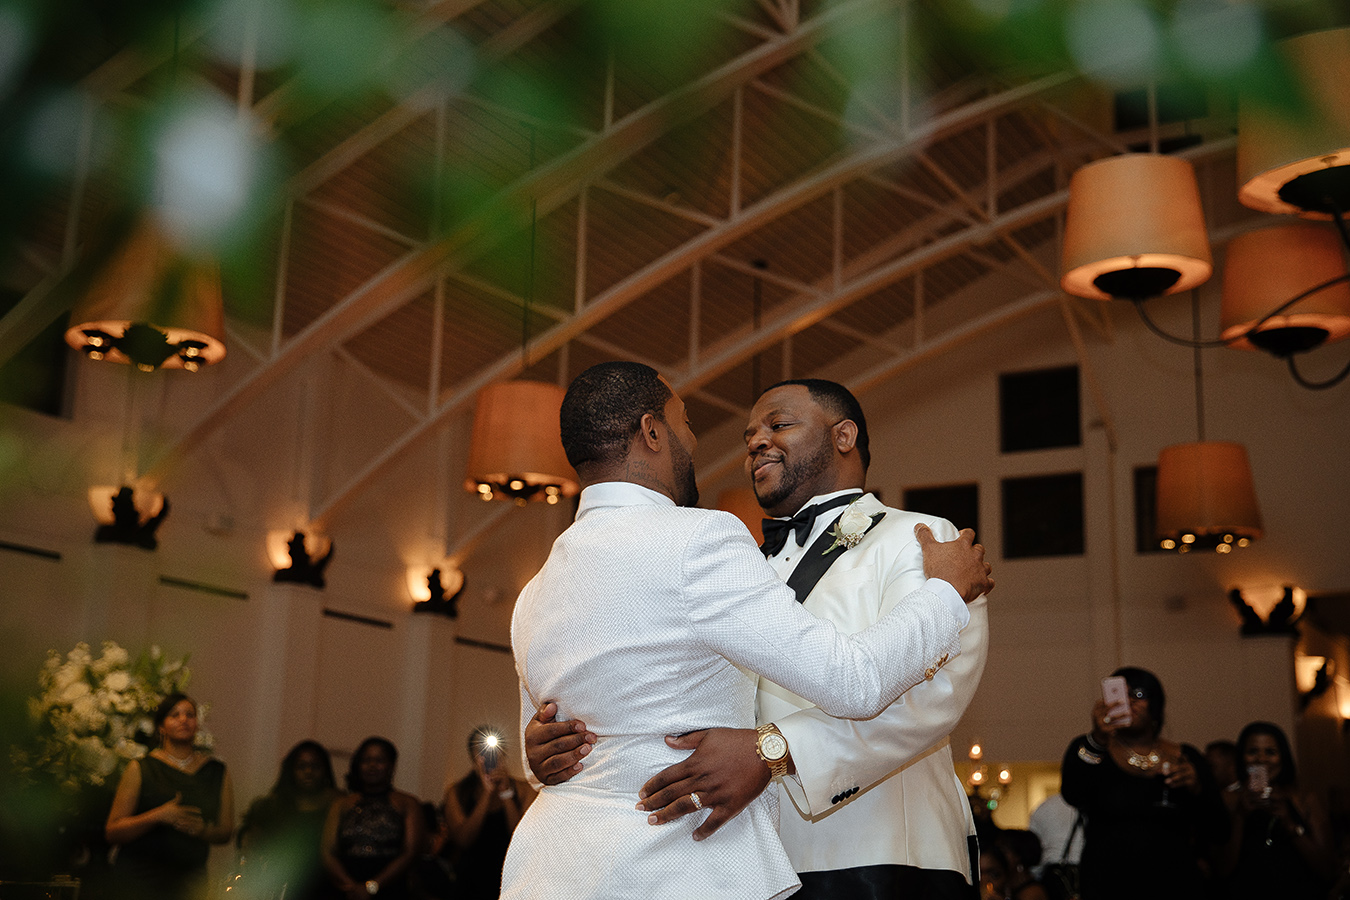 The couple shared a romantic first dance as newlyweds to the R&B/Soul love song “Change Your World” by Anthony Hamilton.